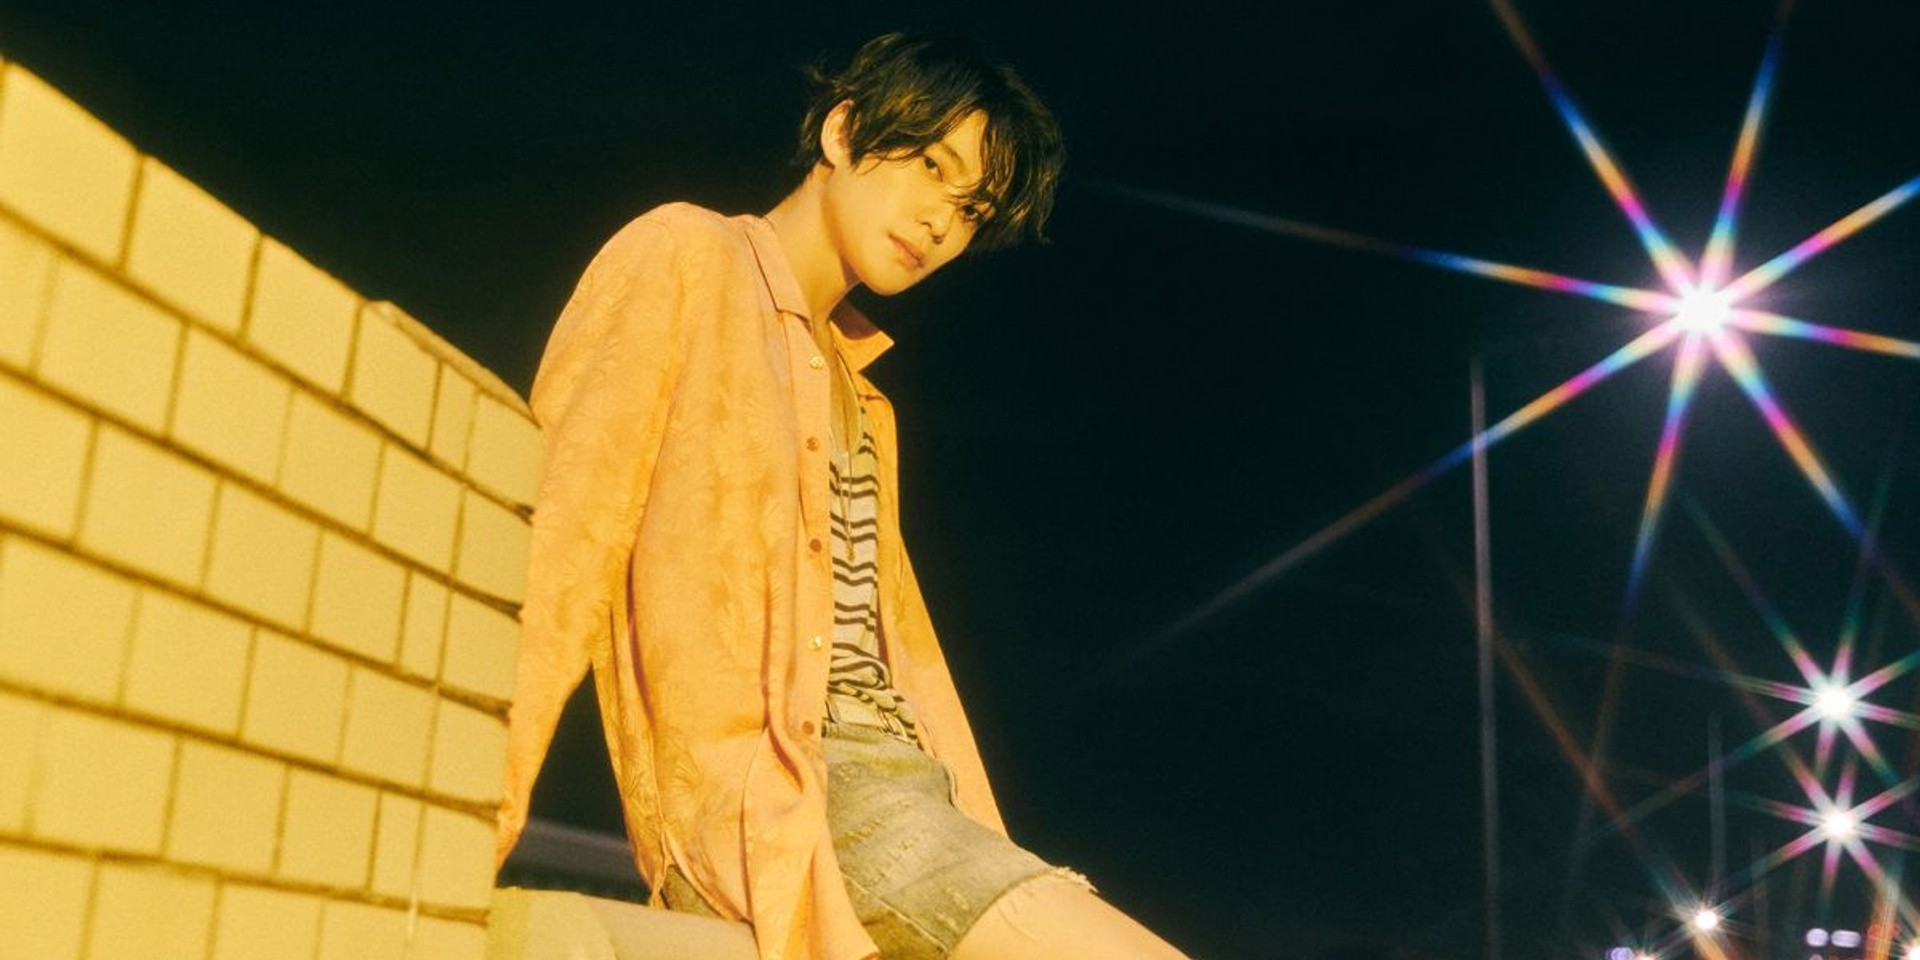 NCT's Jaehyun to release first solo single 'Forever Only' this August